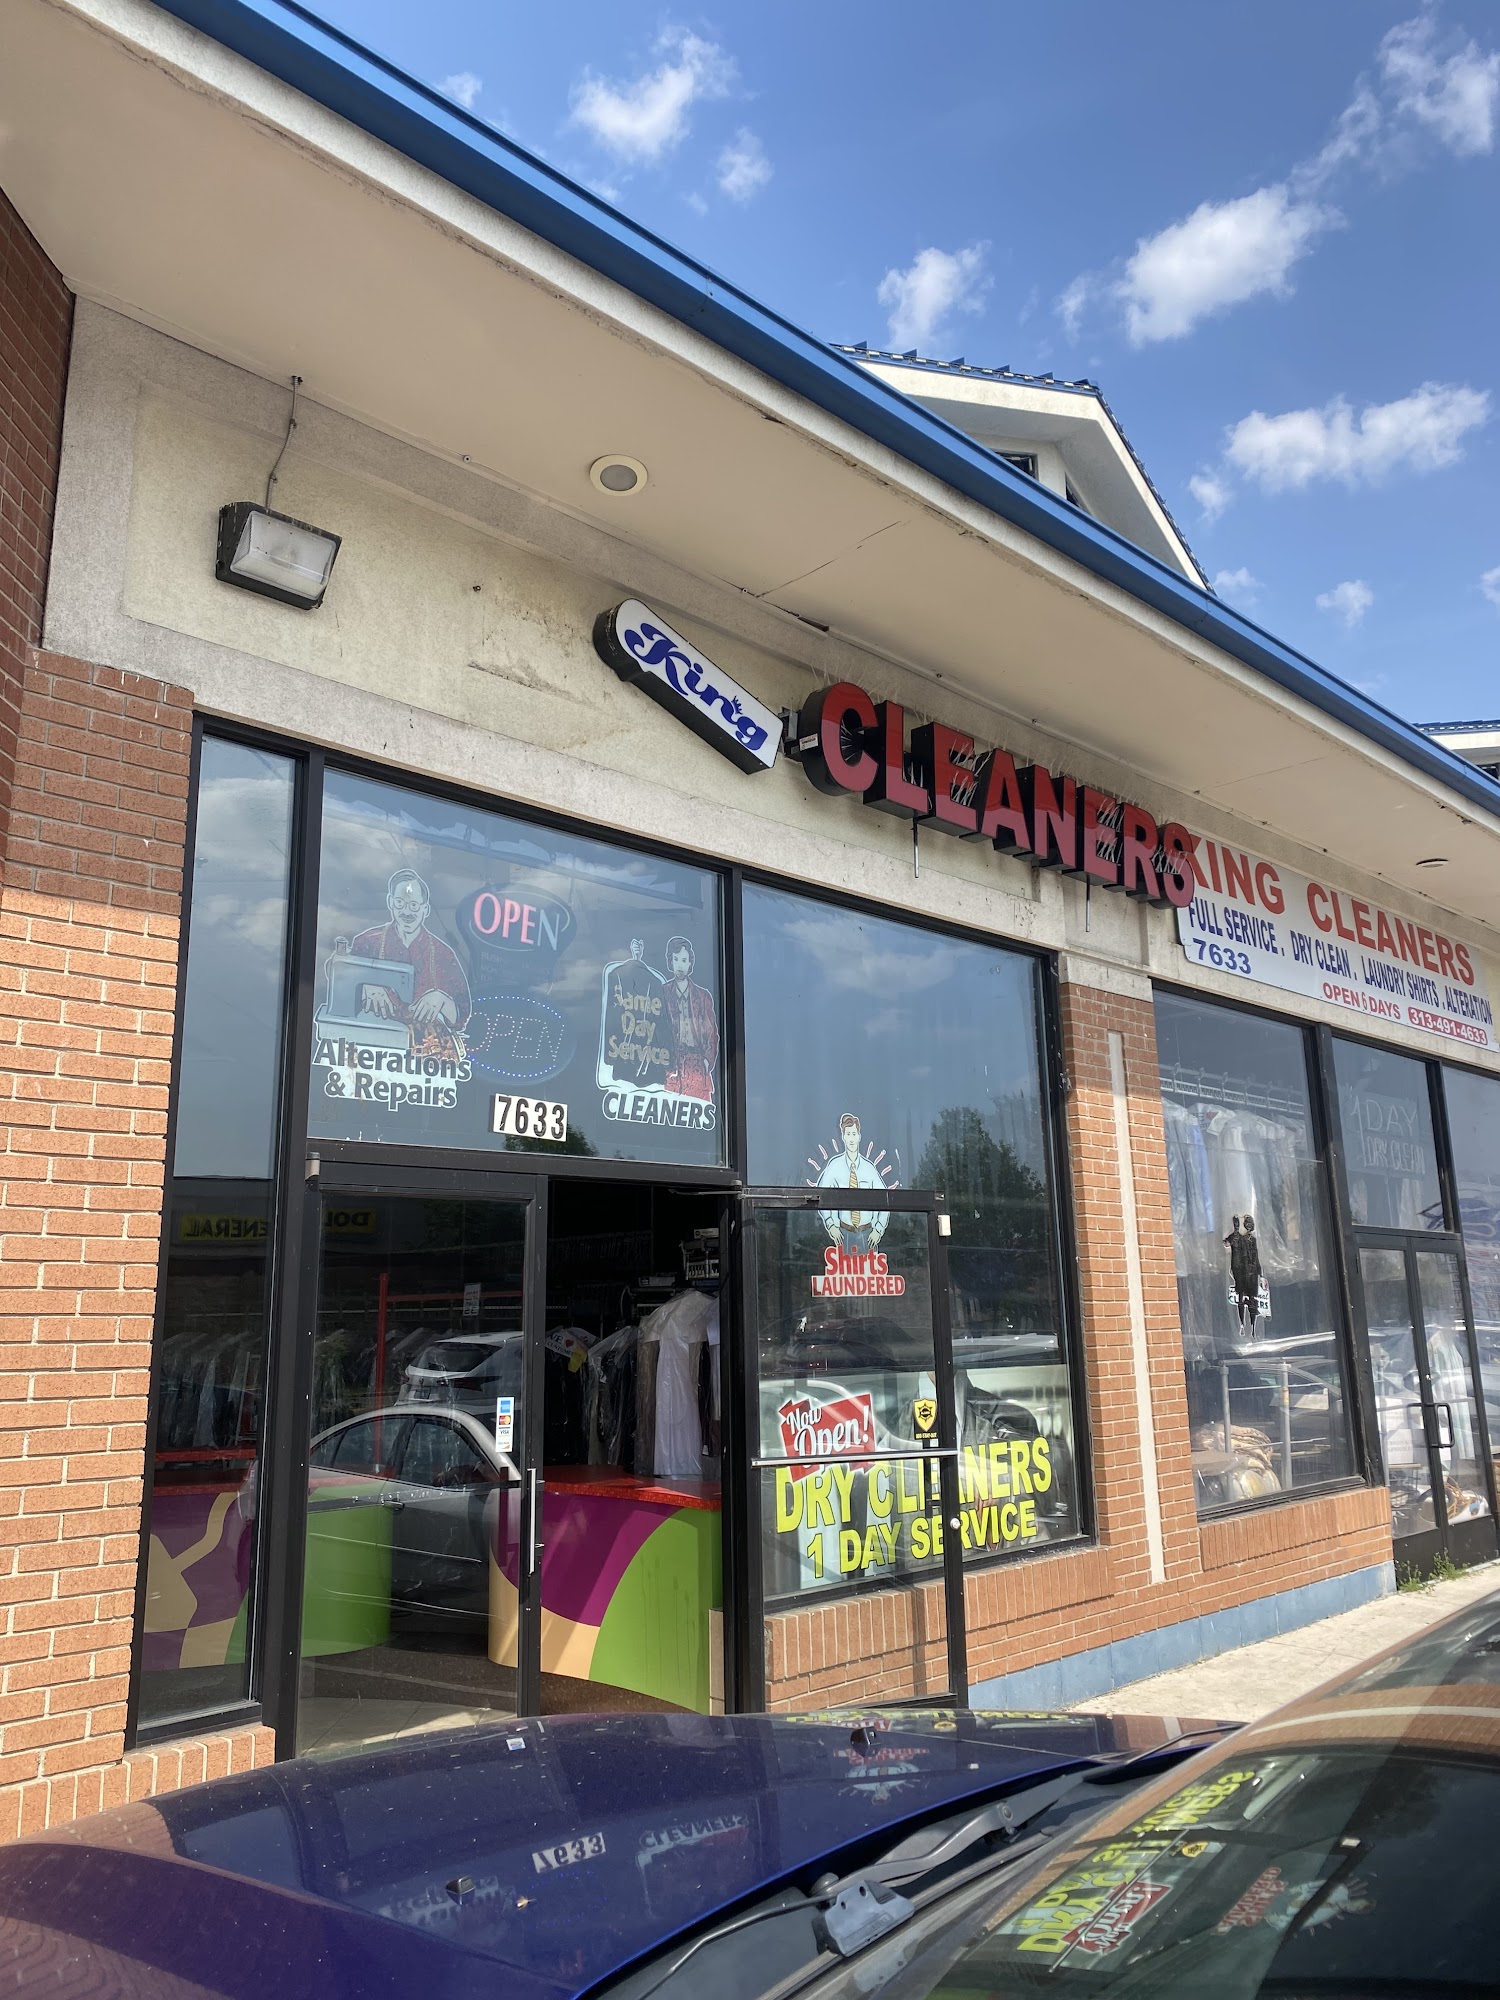 King 189 Cleaners